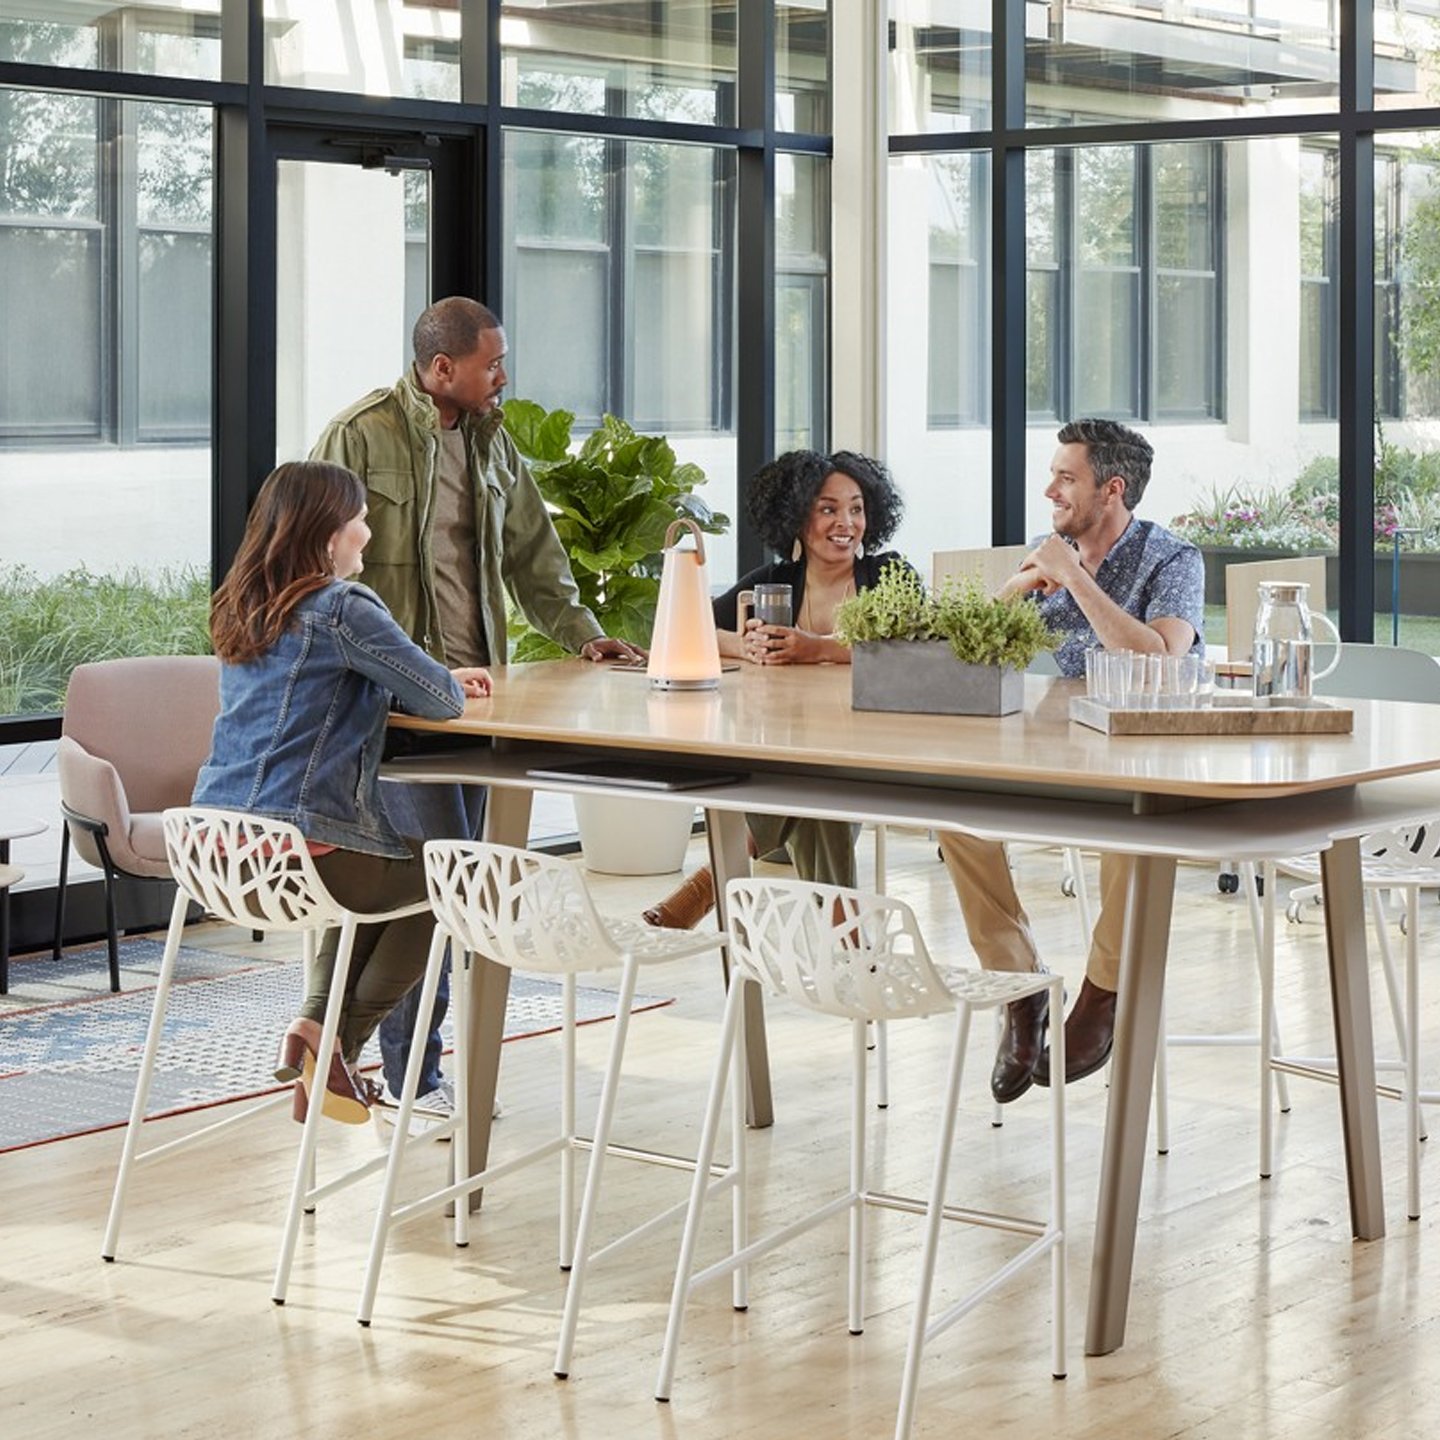 Haworth Uma Lighting in open office space at table for collaboration with employees working